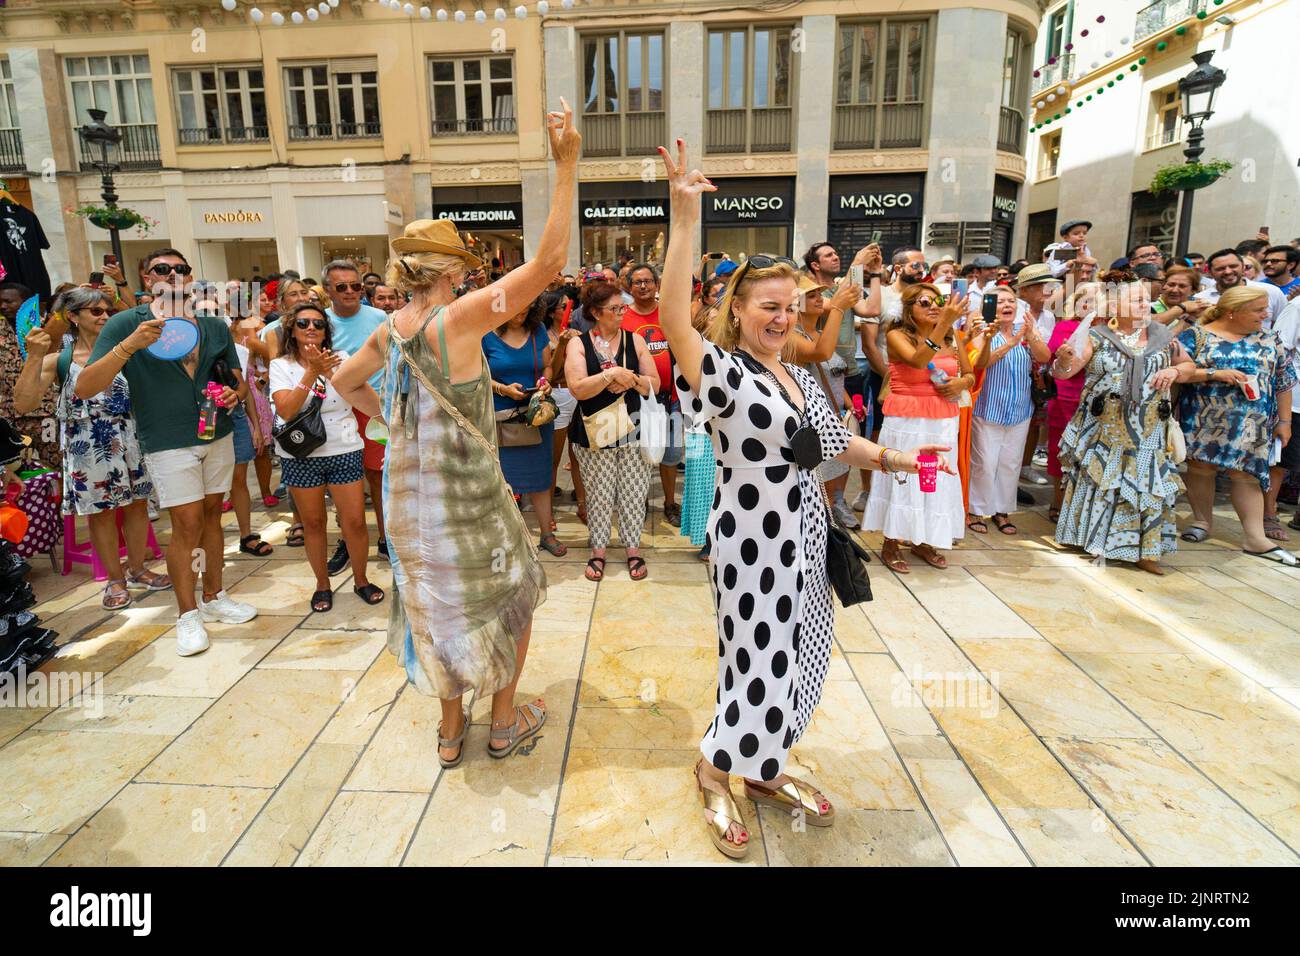 People seen dancing flamenco on the street during the first day of Malaga's Fair 2022. The Fair is being held for the first time since 2019. The 2020 and 2021 editions were suspended due to Covid19 pandemic. Stock Photo